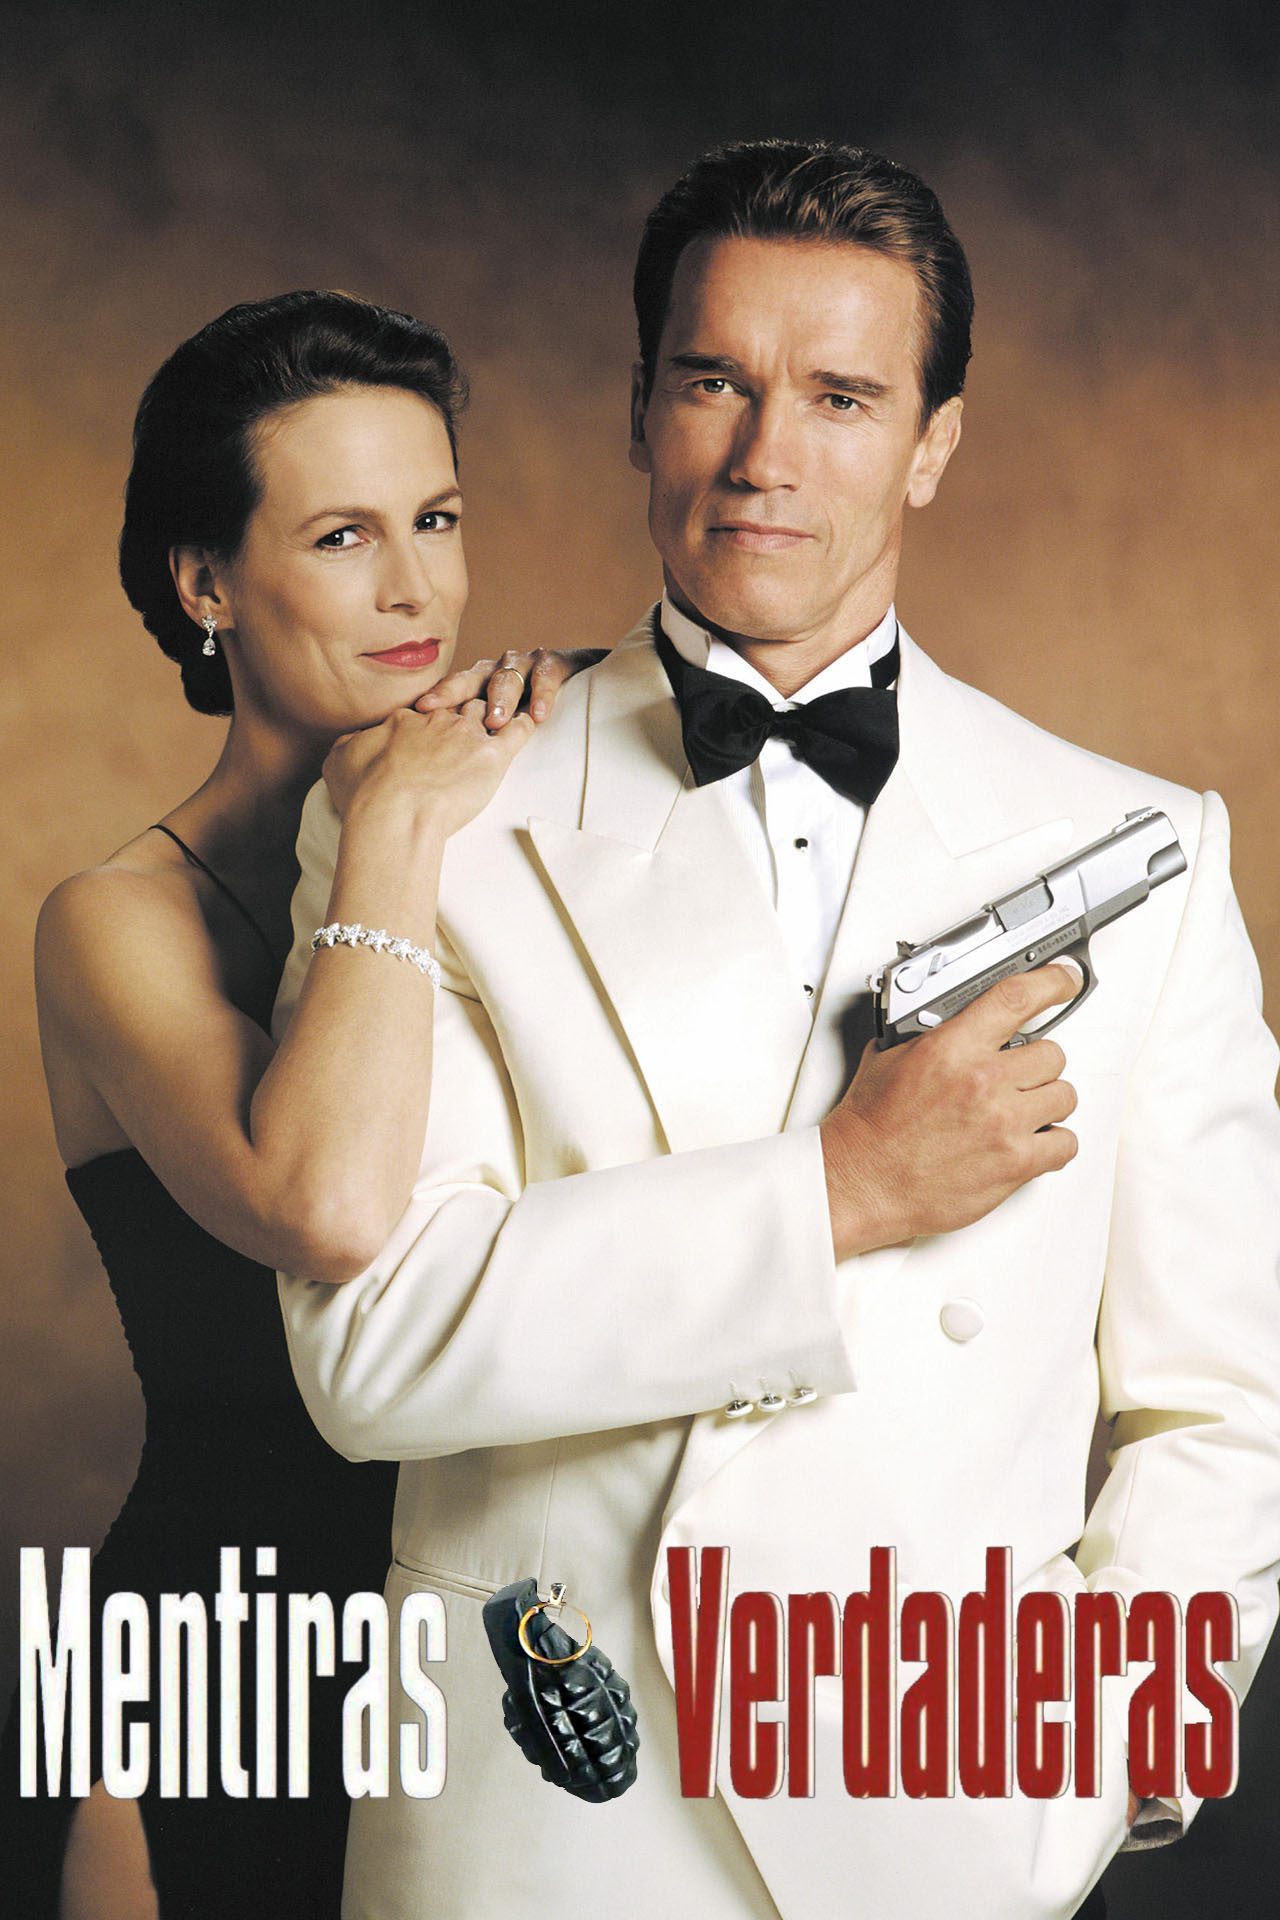 True Lies streaming, Where to watch, TV show guide, Action movie recommendations, 1280x1920 HD Phone